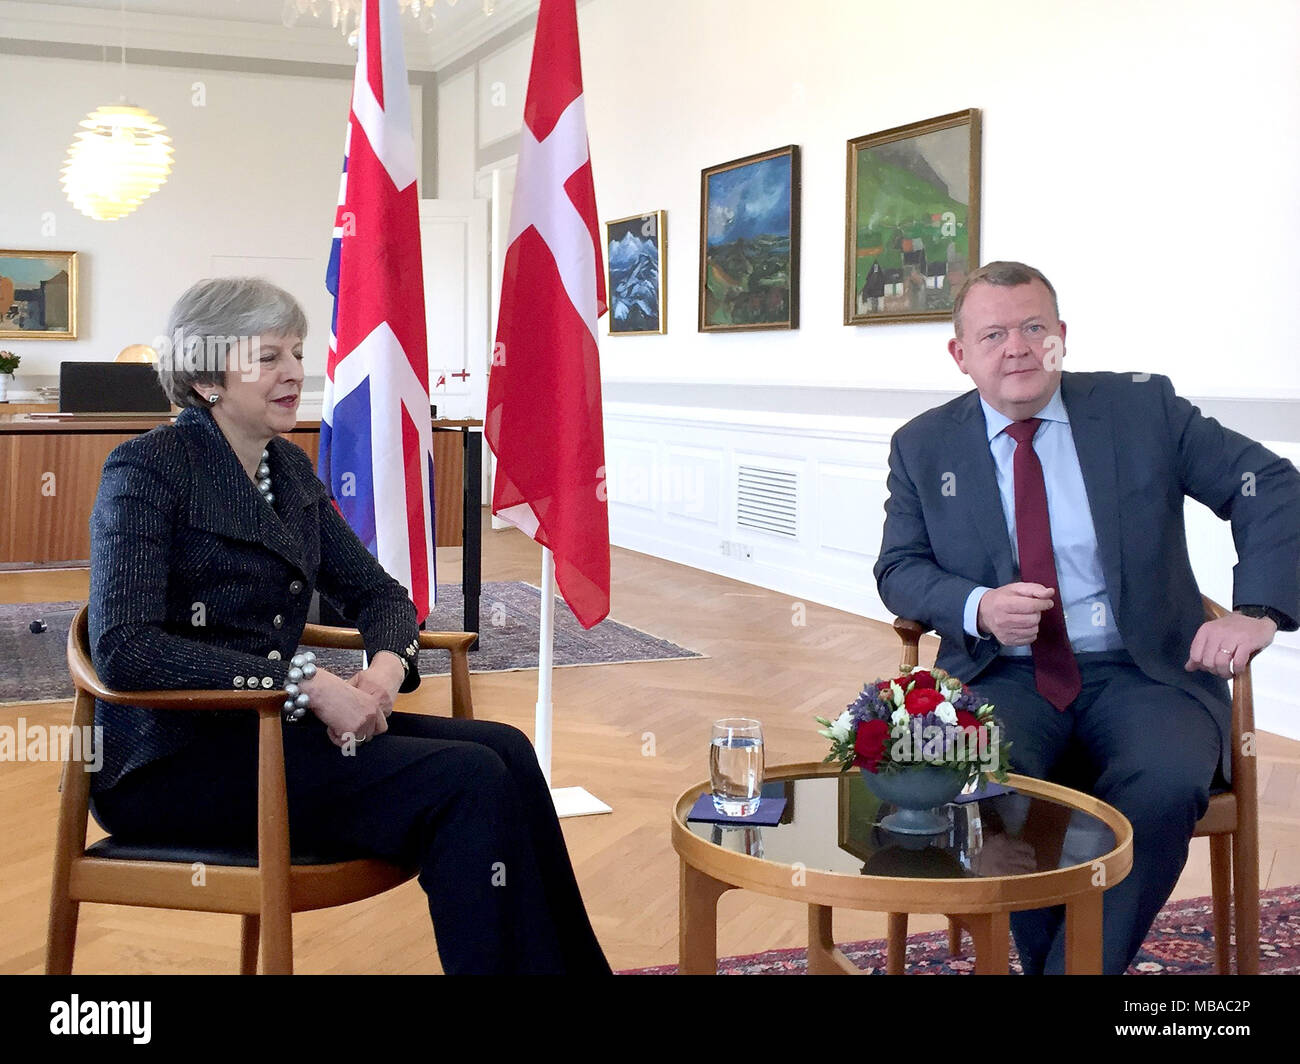 Theresa May alongside Danish PM Lars Rasmussen inside Christiansborg Castle, Copenhagen, as the two leaders are expected to discuss Brexit as well as the threat Russia poses to international security during the one-day trip. Stock Photo